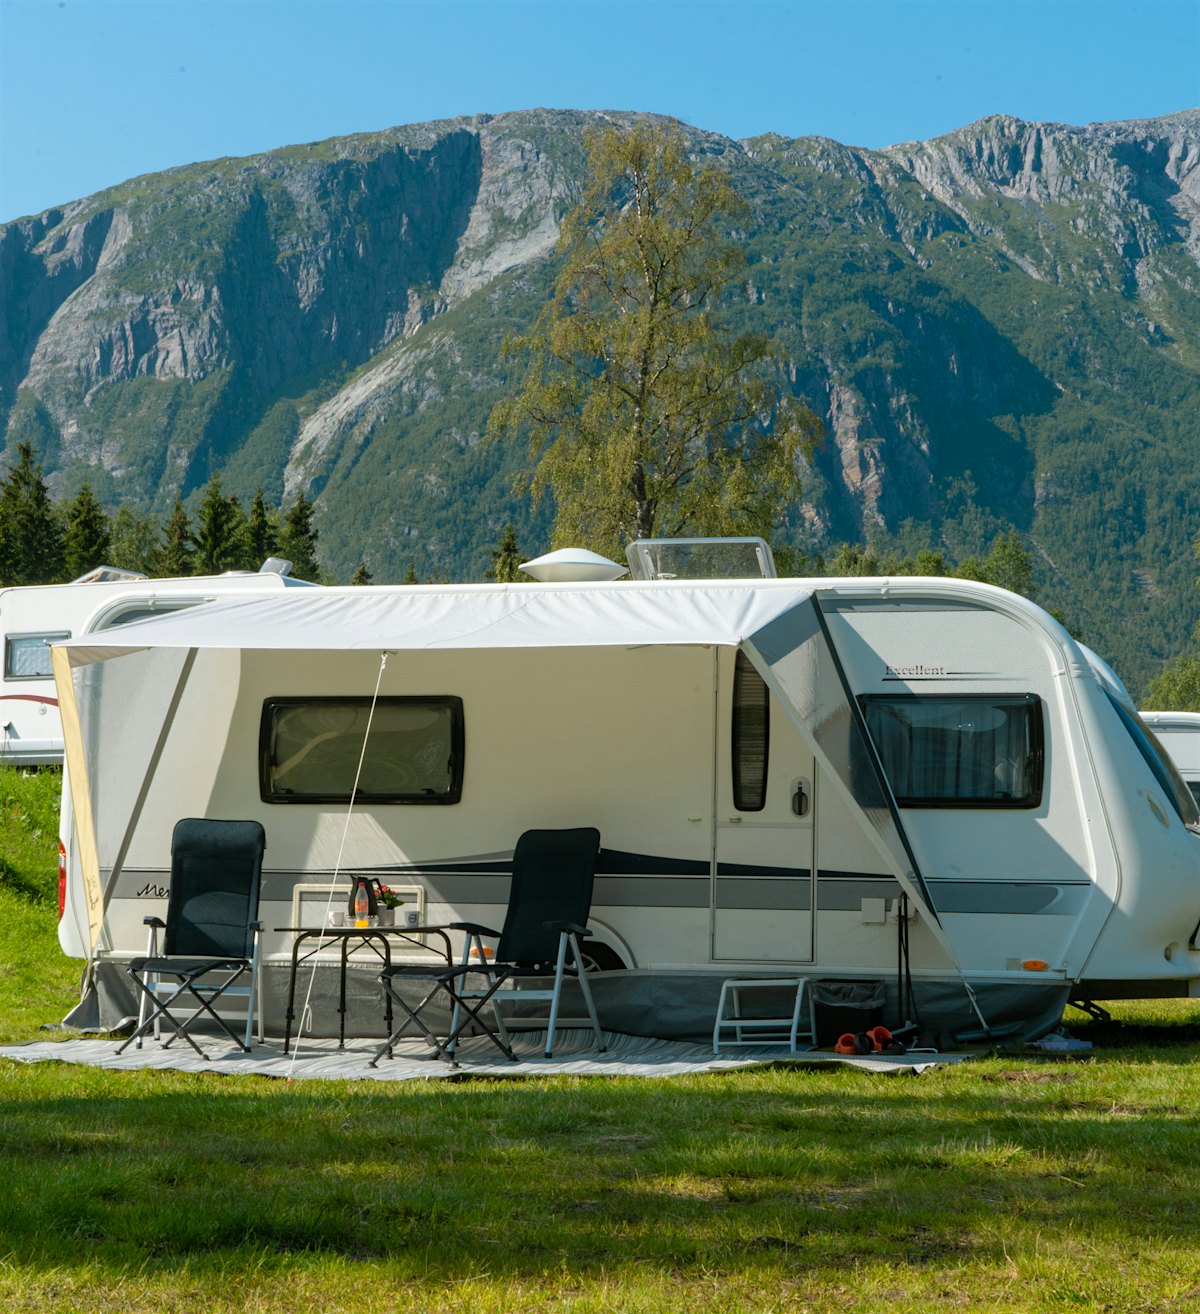 Caravan stands on a campsite, with high mountains in the background. Photo